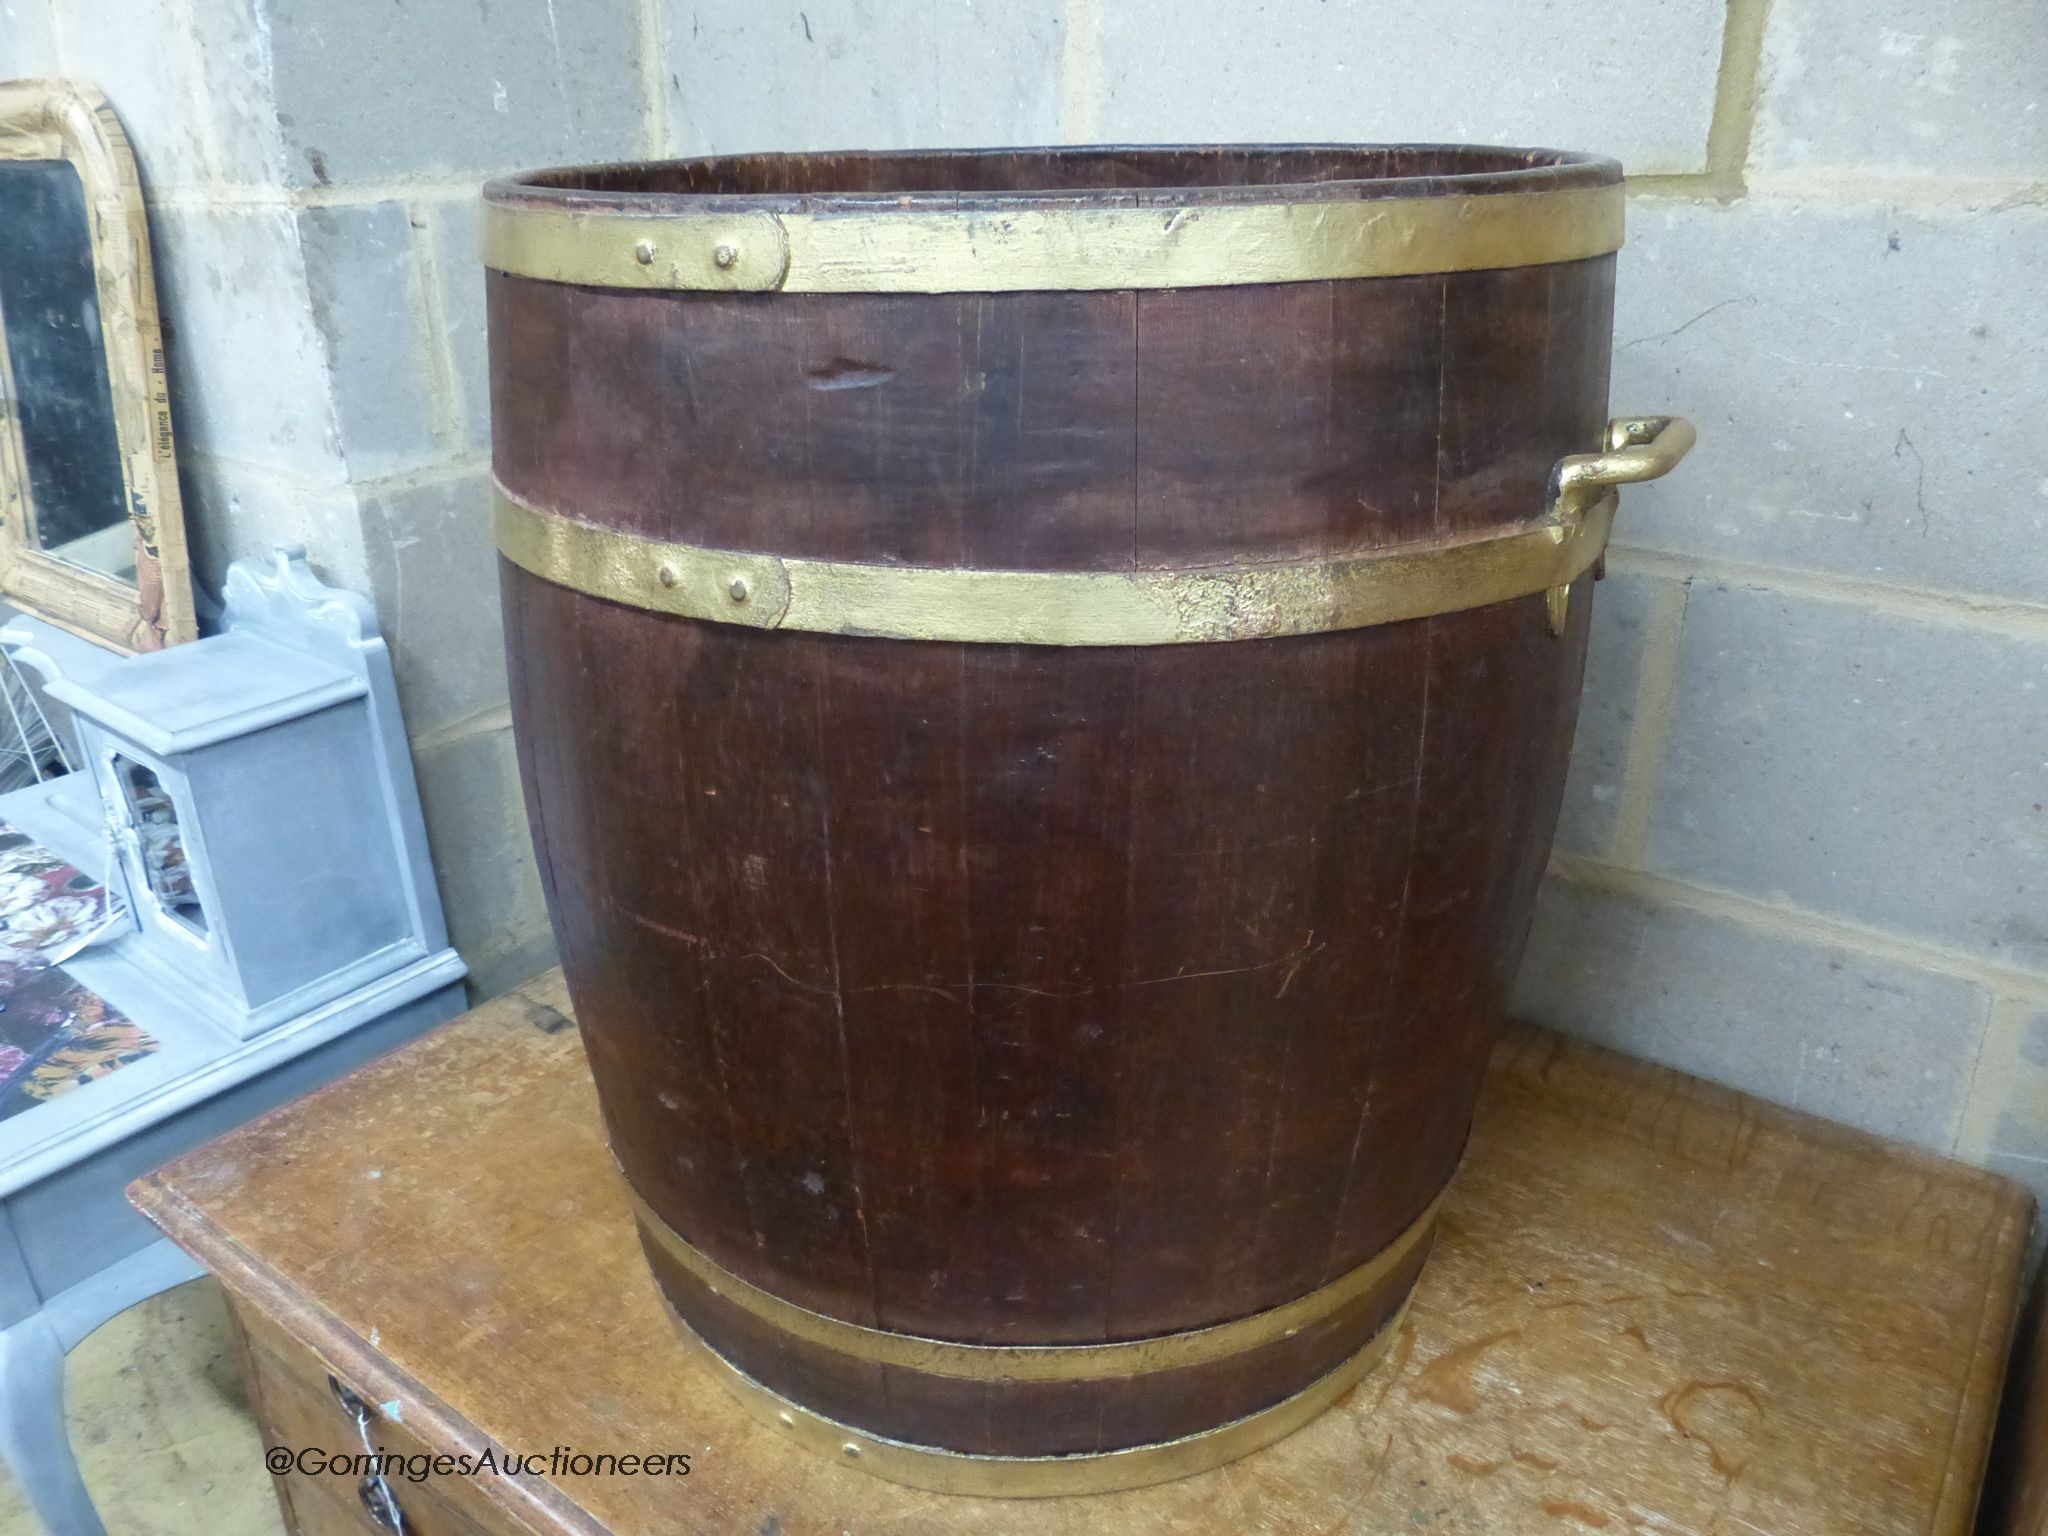 A circular staved oak two handled coopered barrel, 54cm diameter, height 58cm